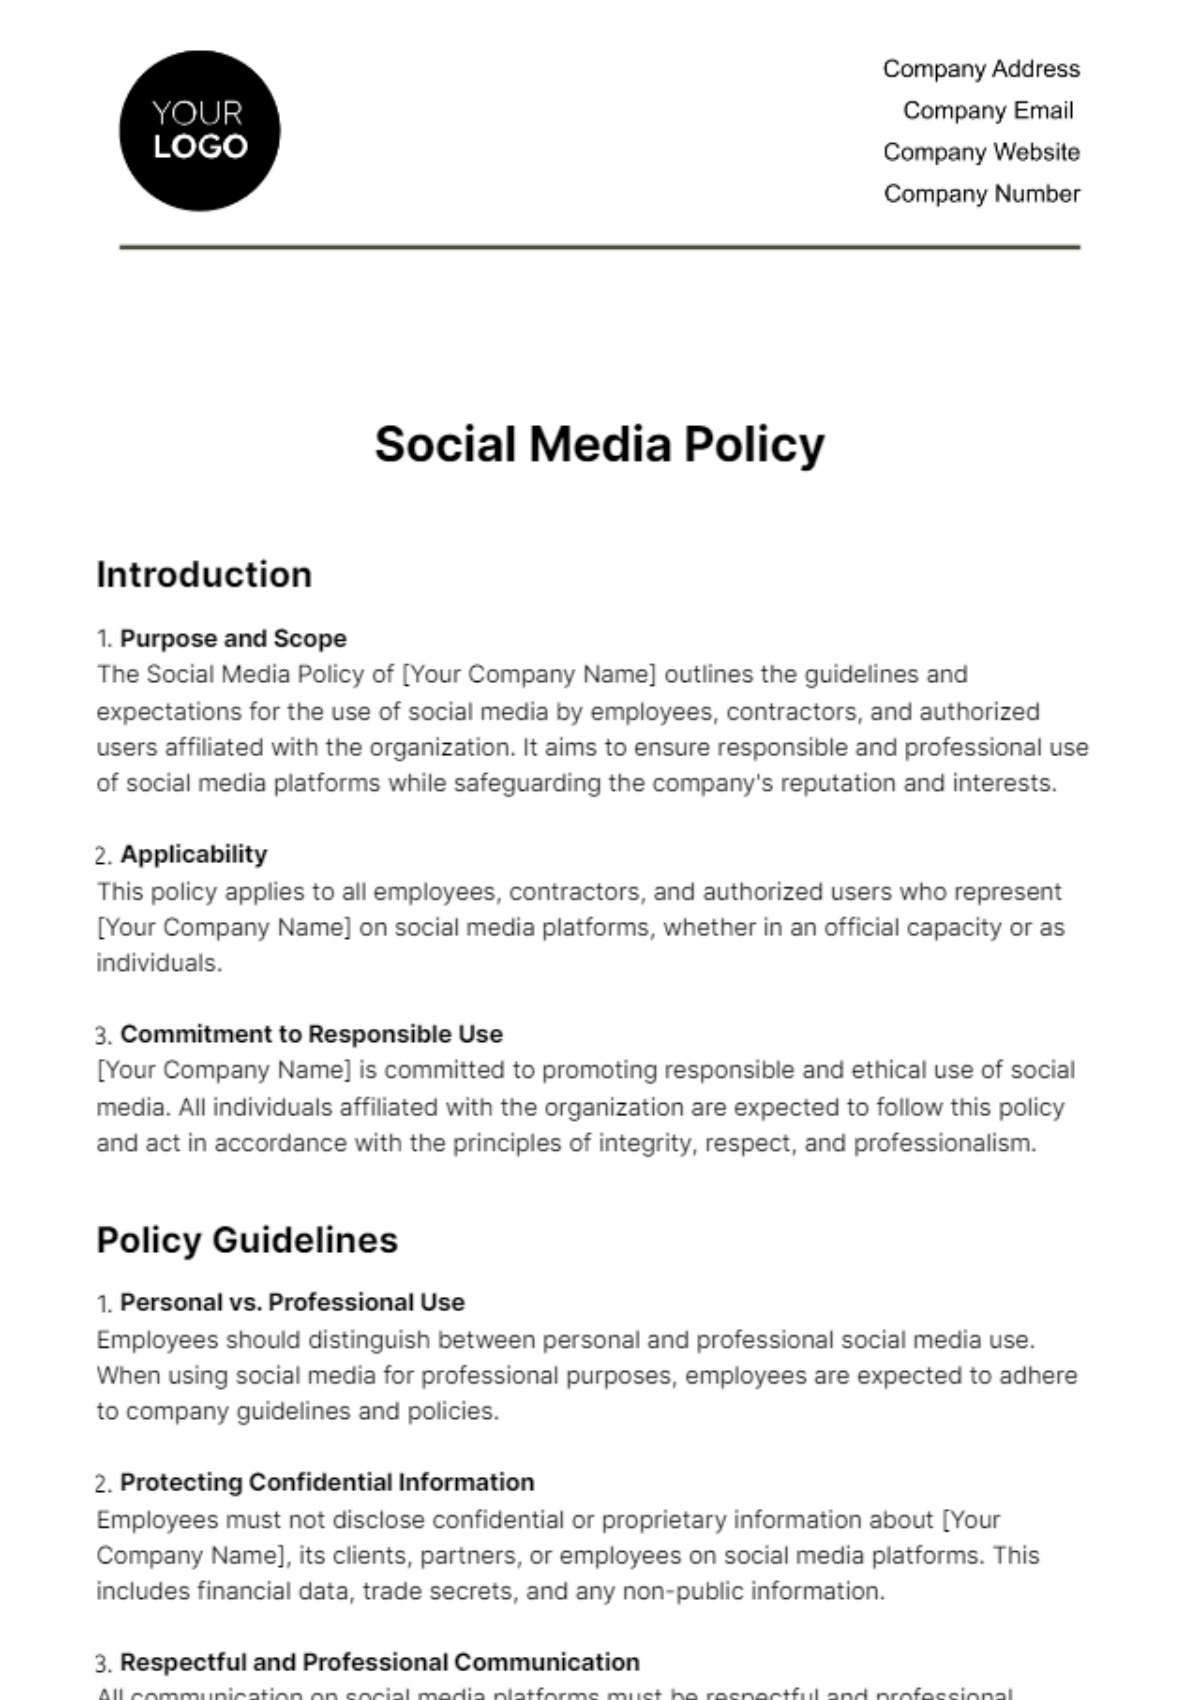 Social Media Policy HR Template